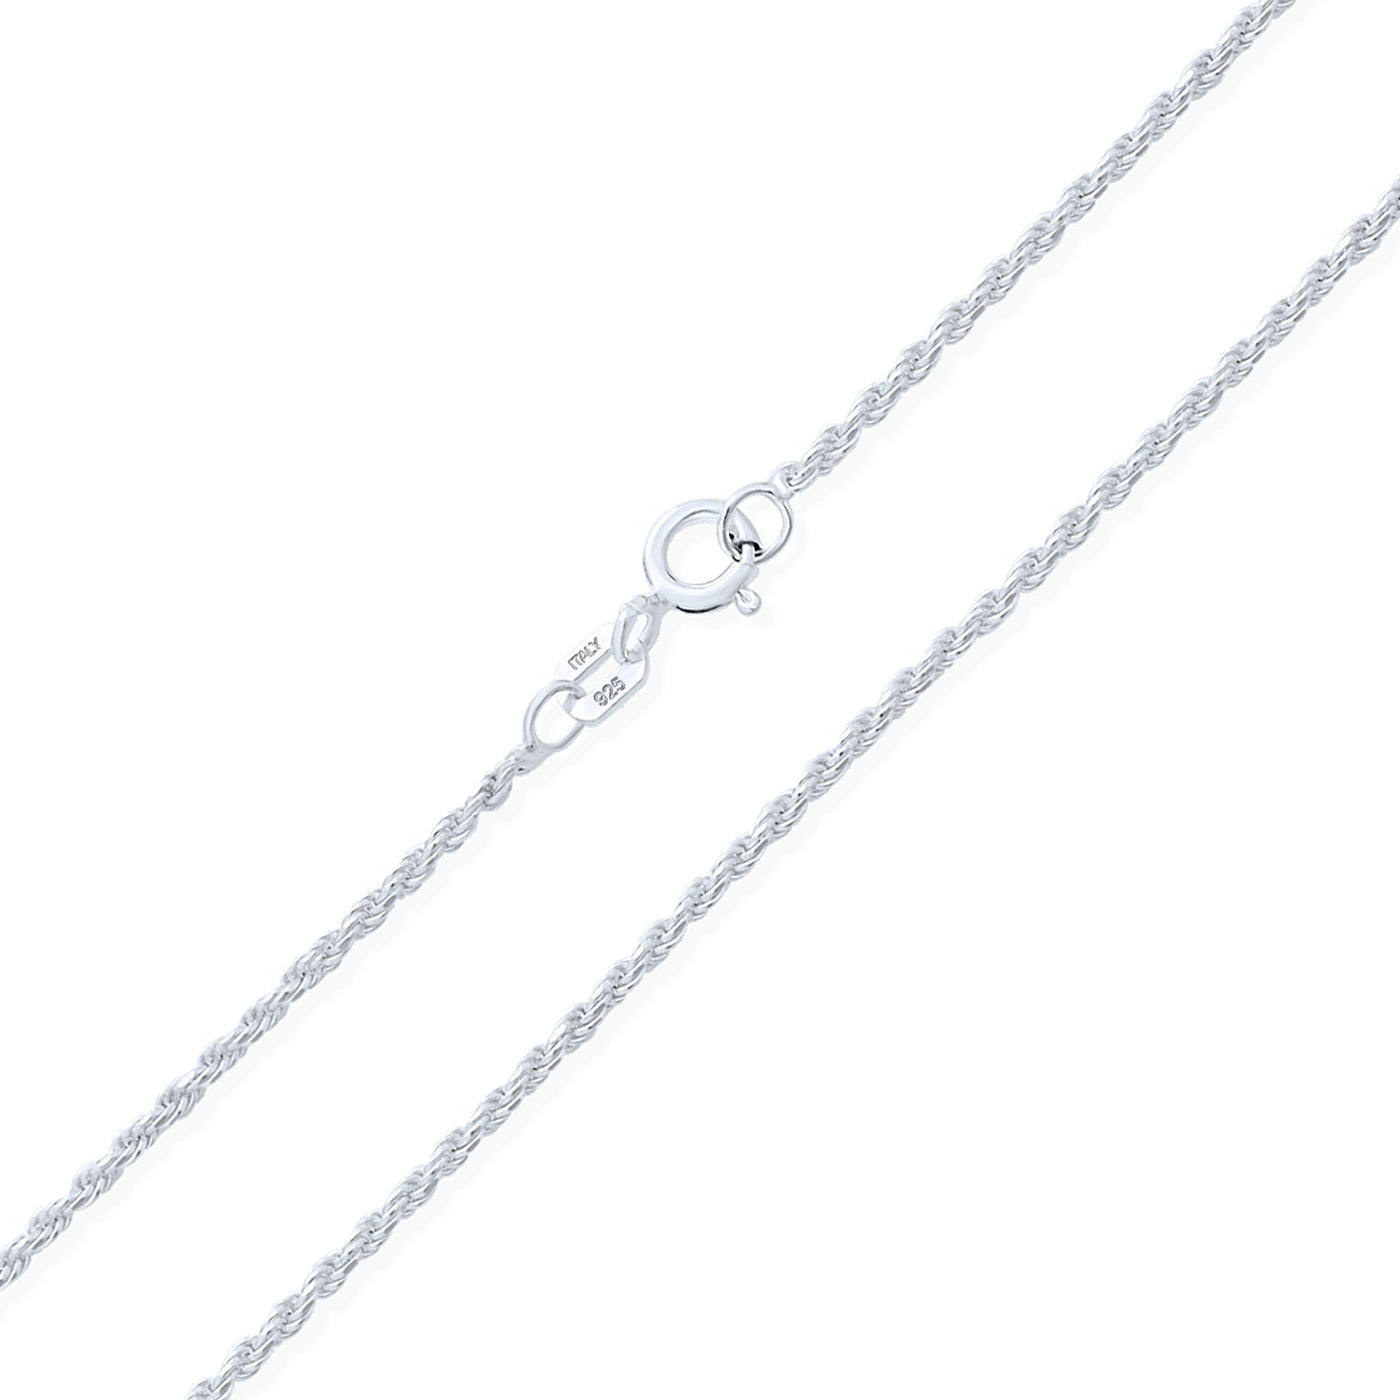 Rope Chain 2 MM 030 Gauge Necklace .925 Sterling Silver Made In Italy